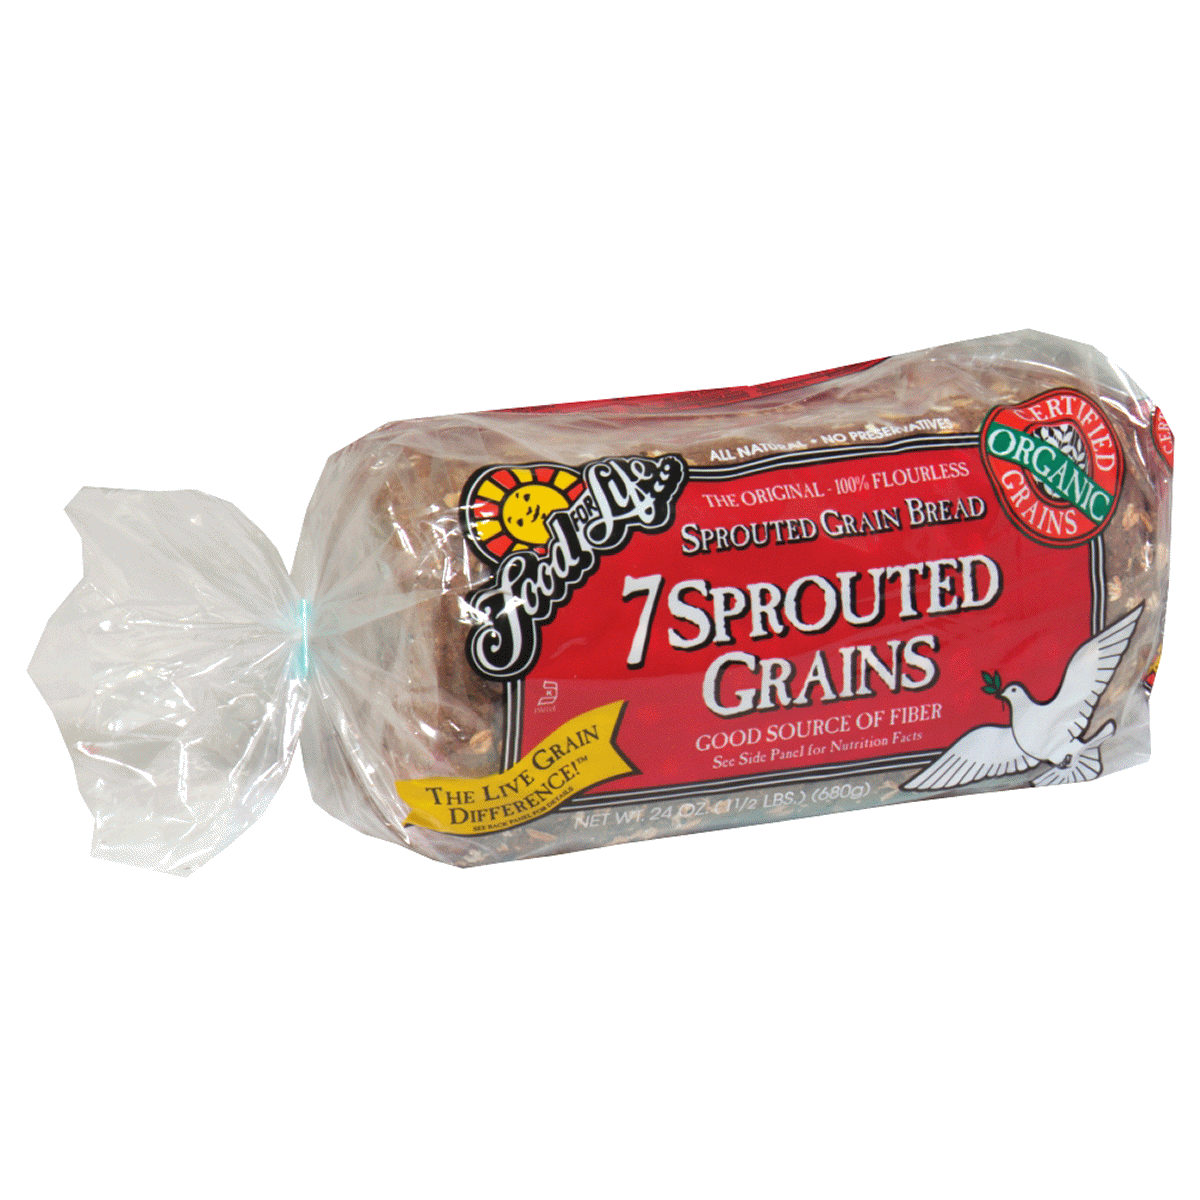 slide 1 of 3, Food for Life 7 Sprouted Grains Bread, 24 oz